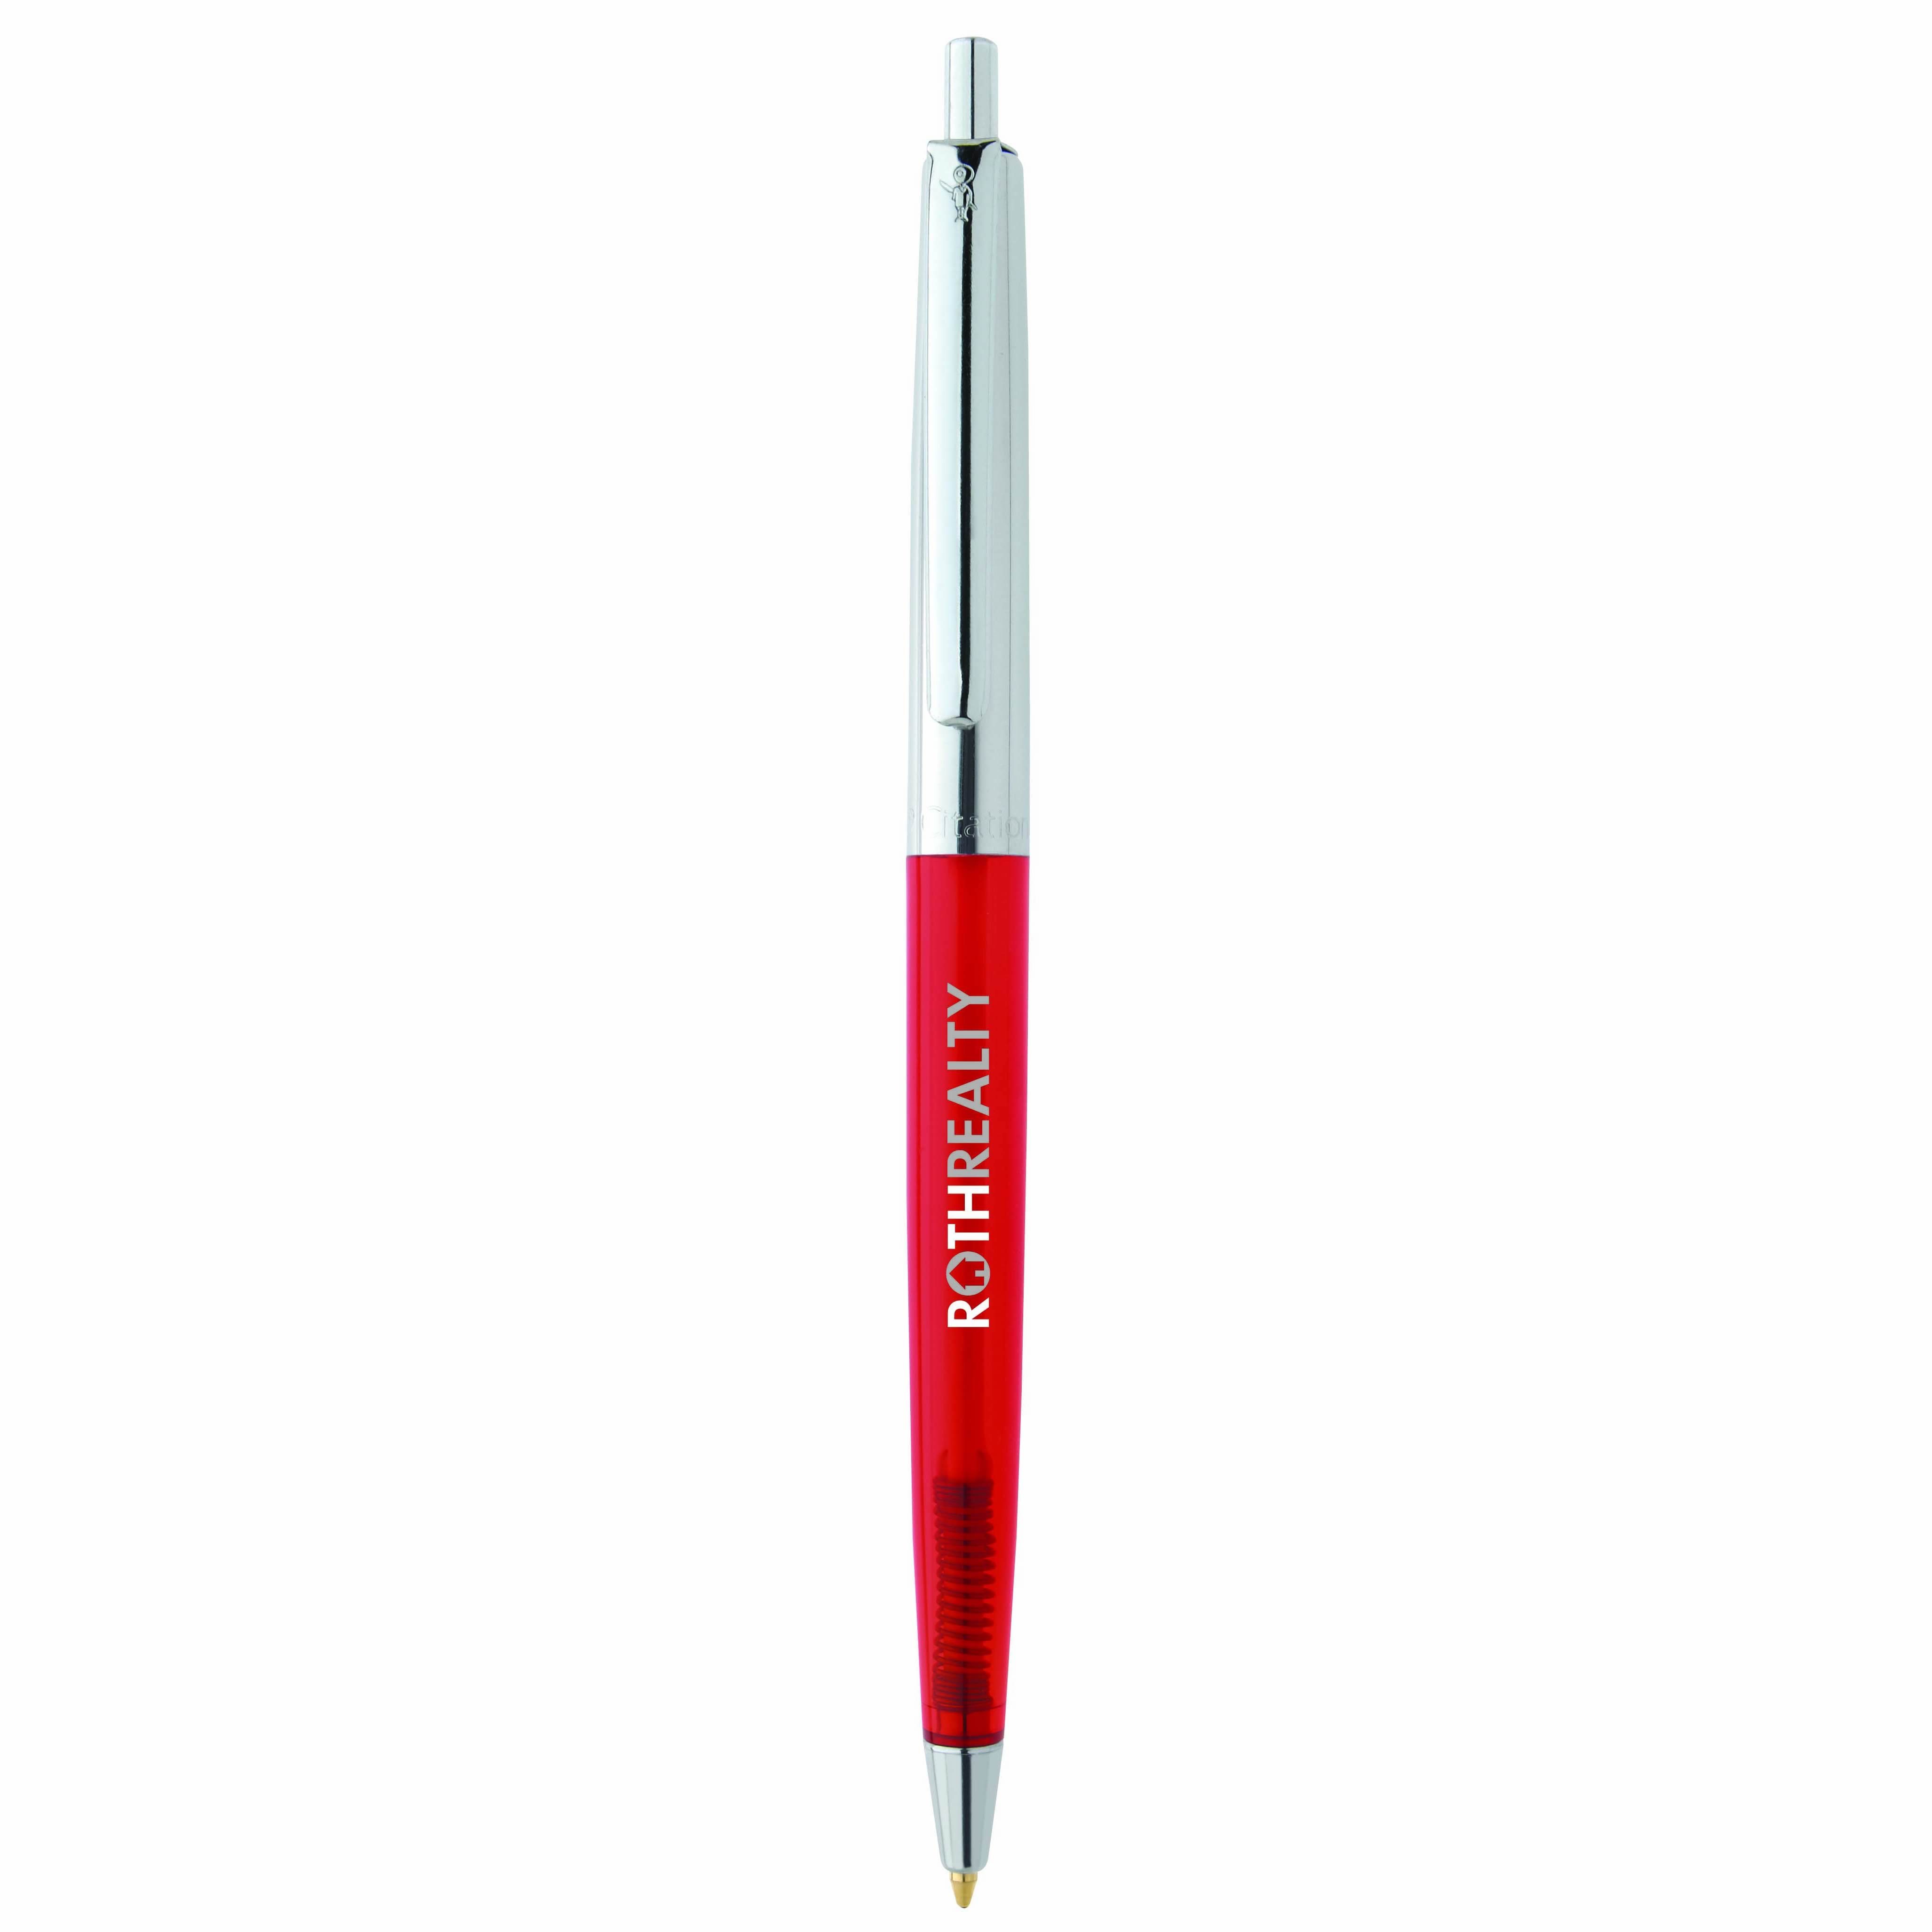 Red Pen Png (73+ images).